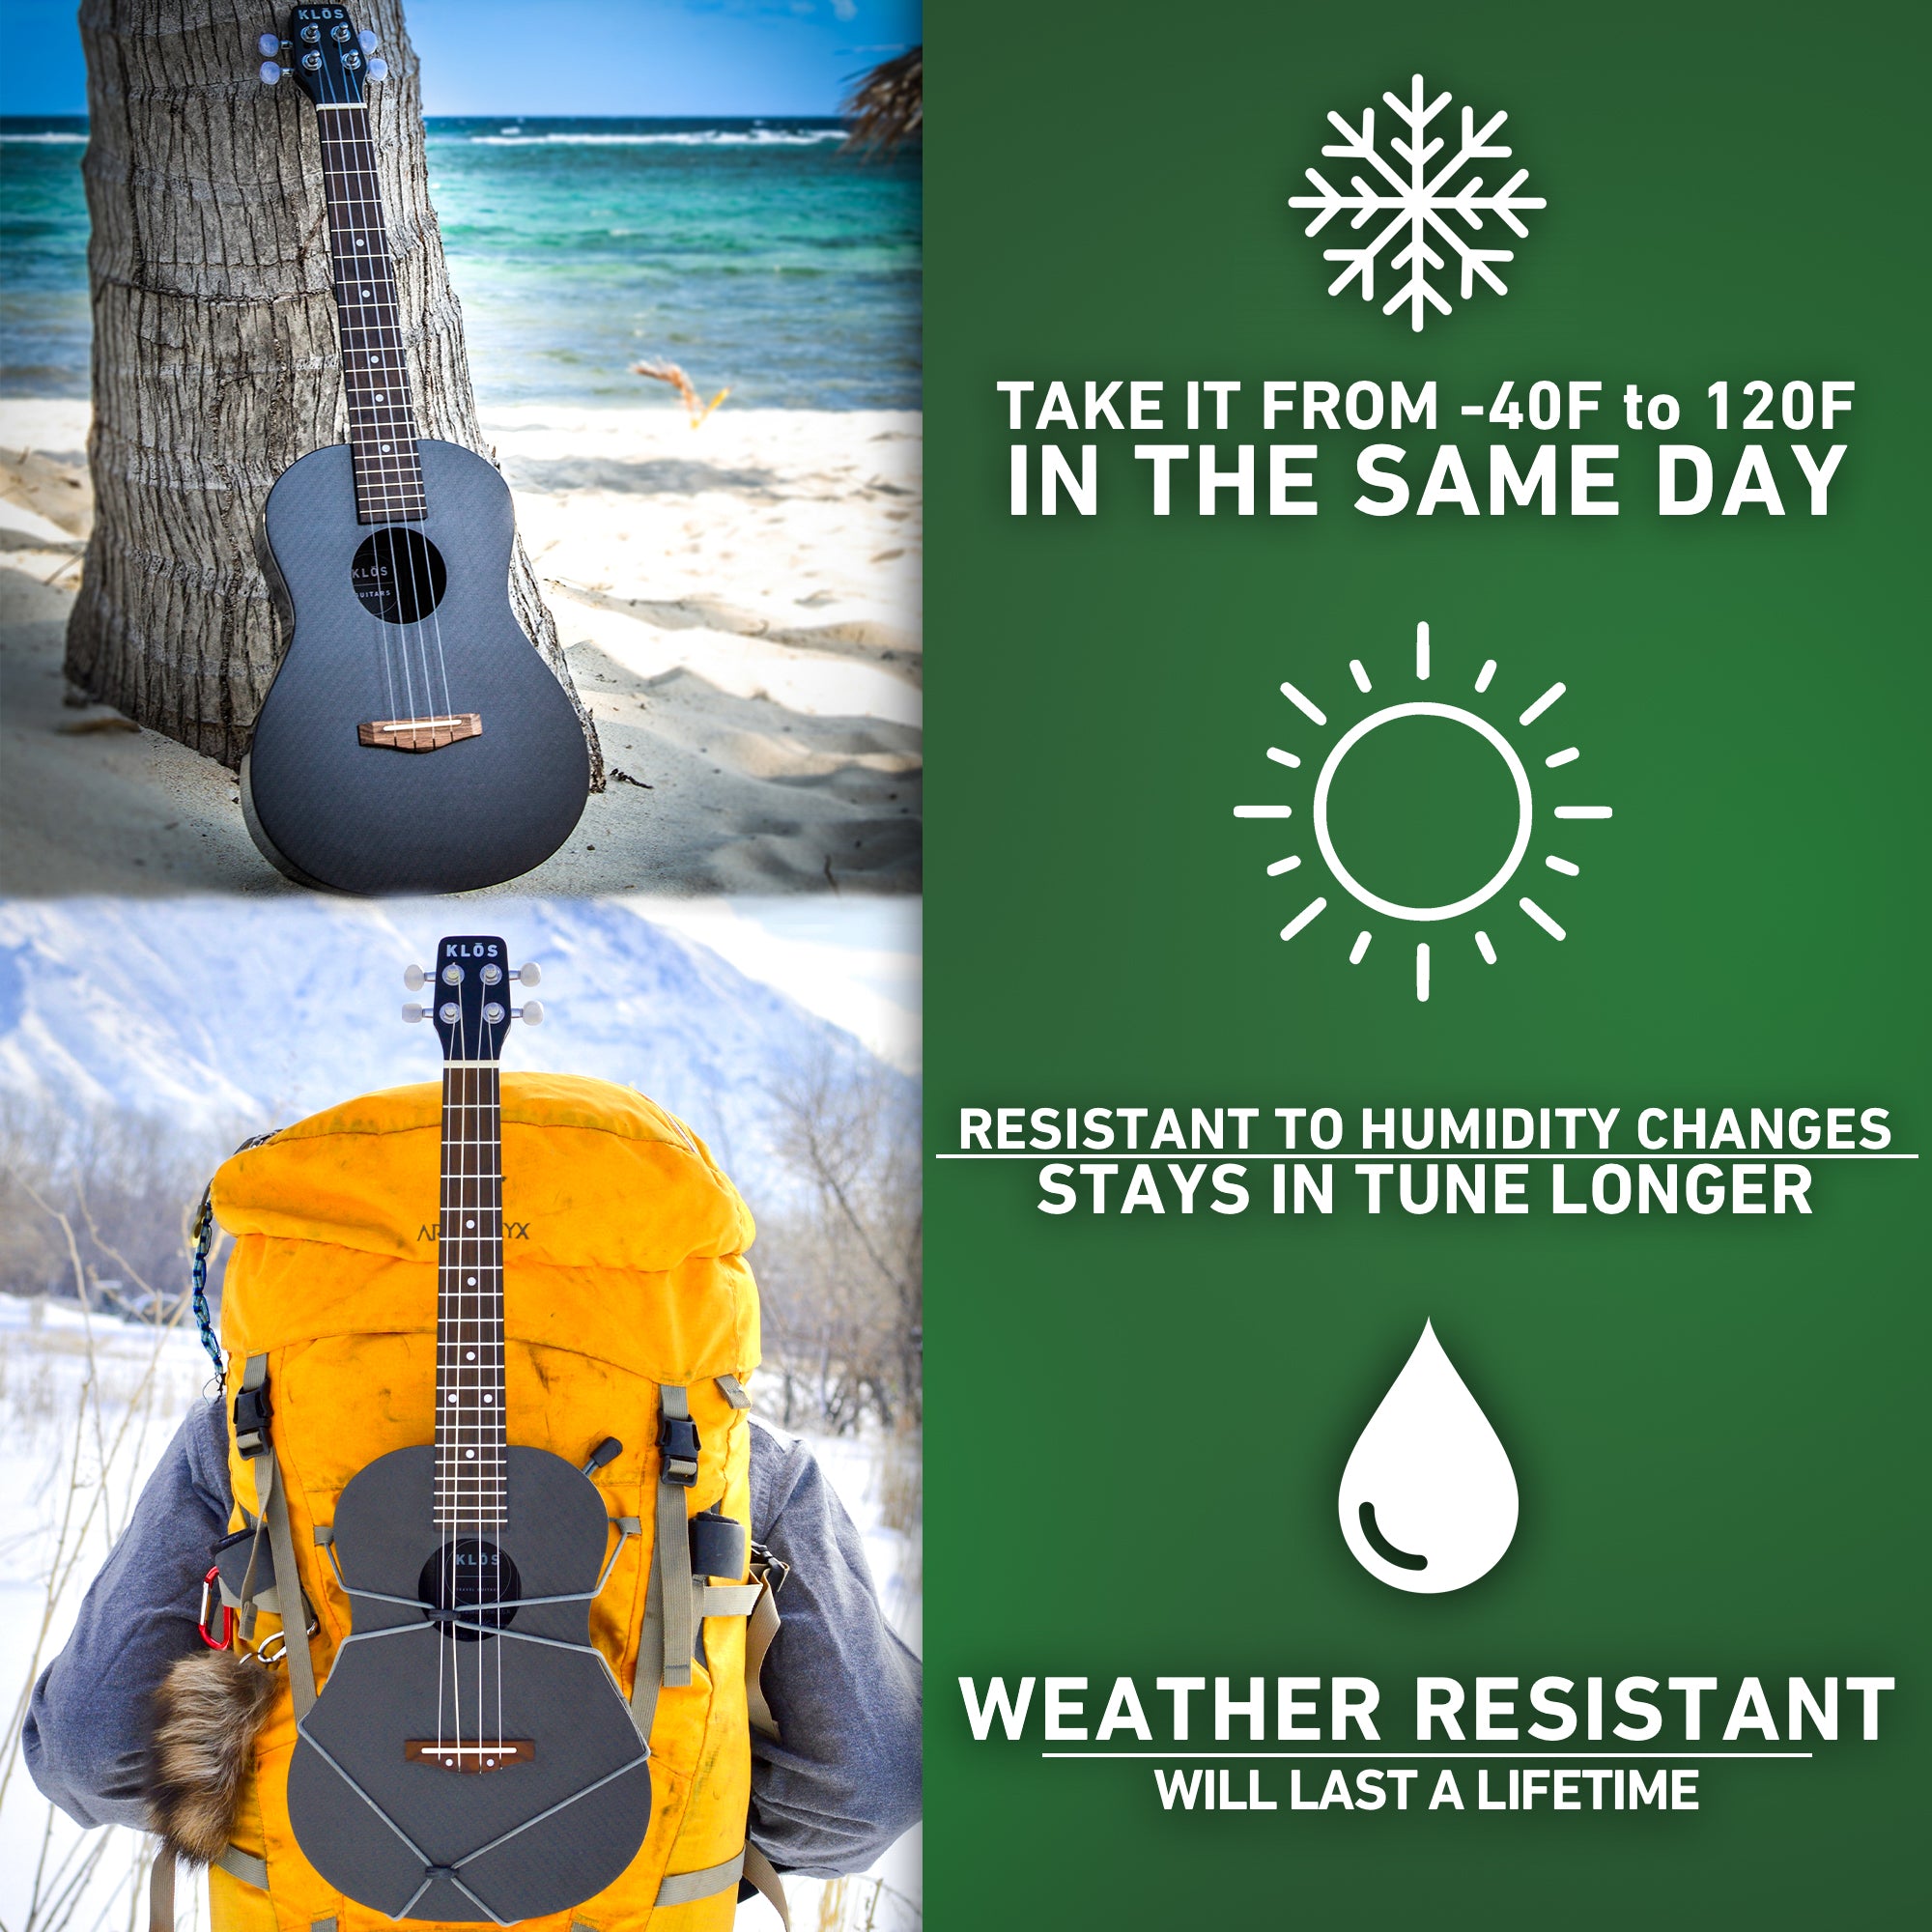 The ukulele body is 100% carbon fiber, making it resistant to temperature and humidity changes. 